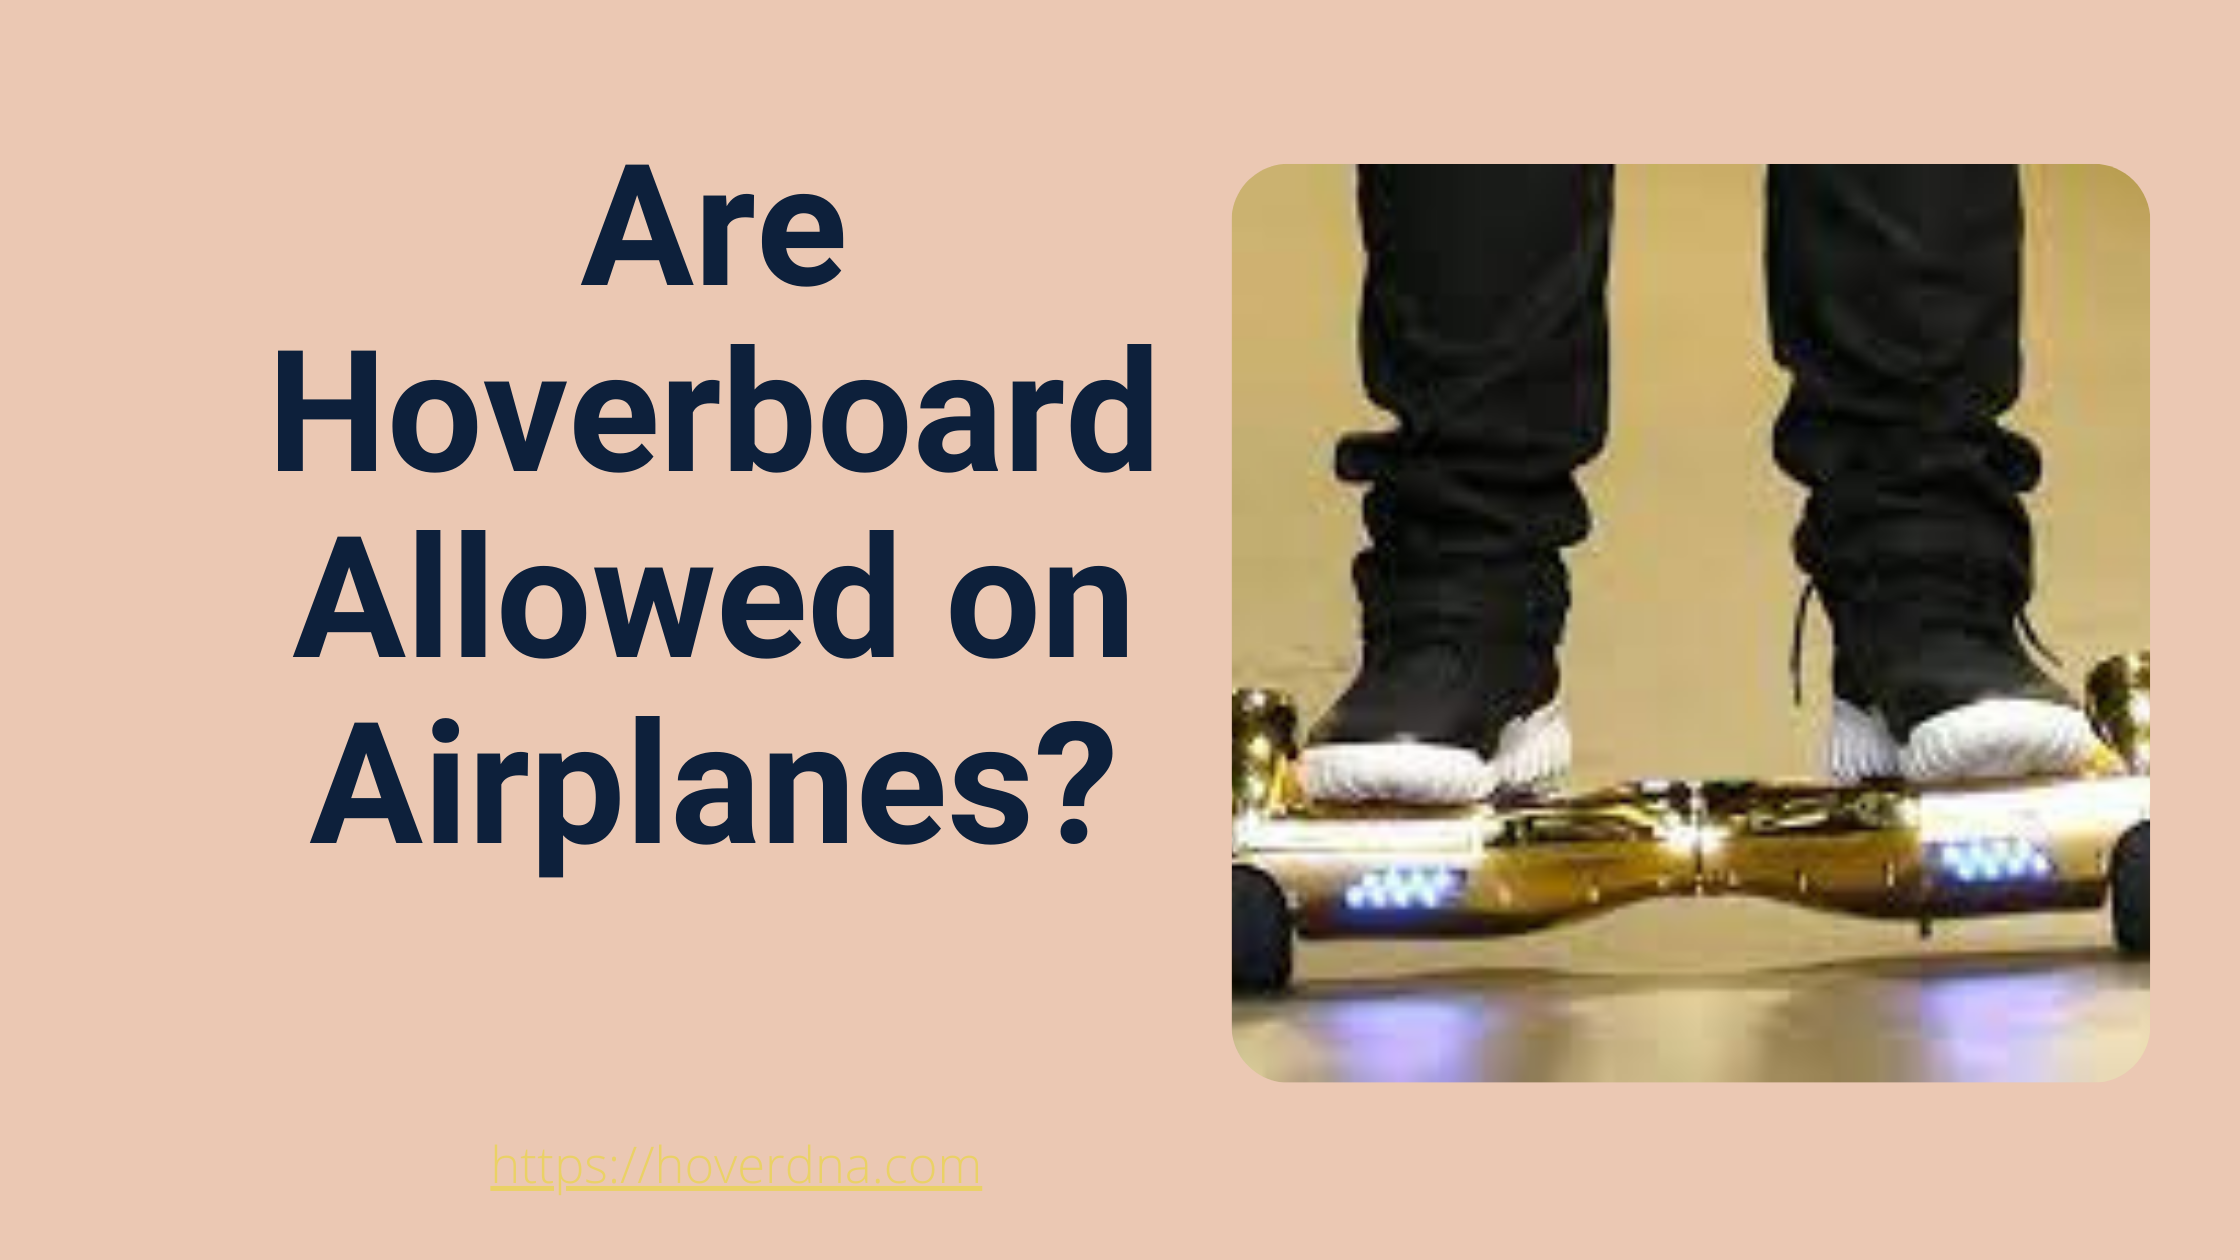 Are Hoverboard Allowed on Airplanes?